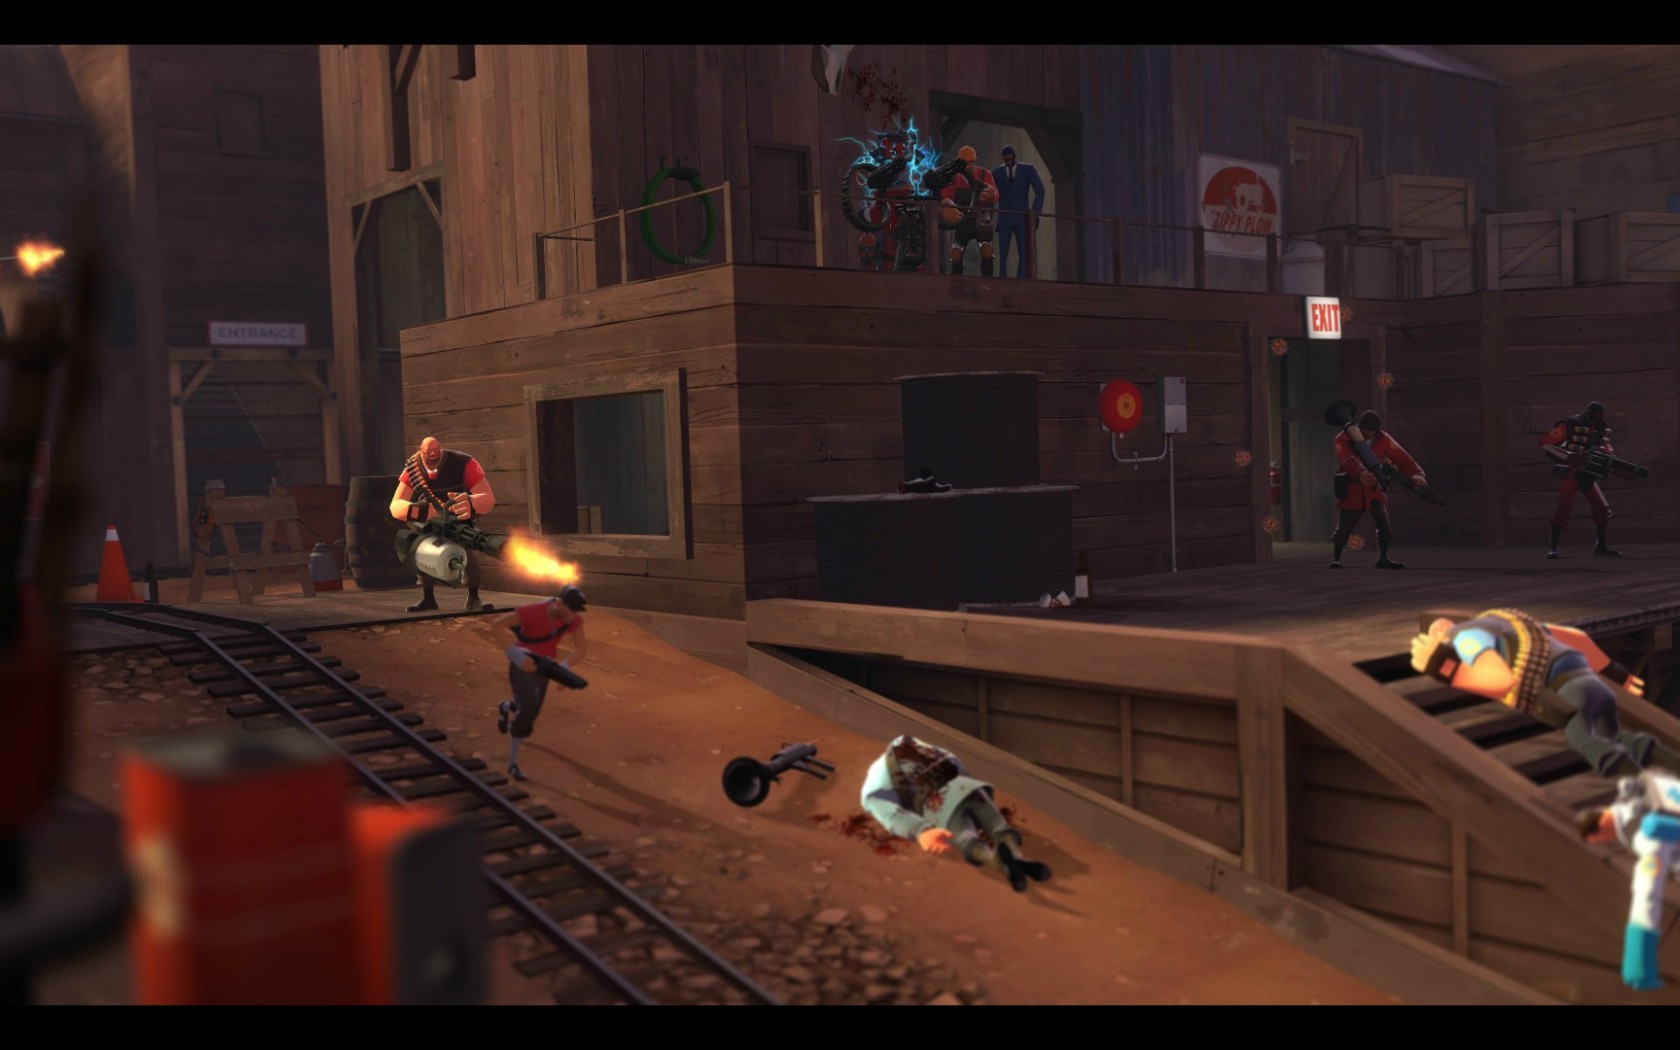 Free Download Team Fortress 2 Hd Wallpaper for Desktop and Mobiles